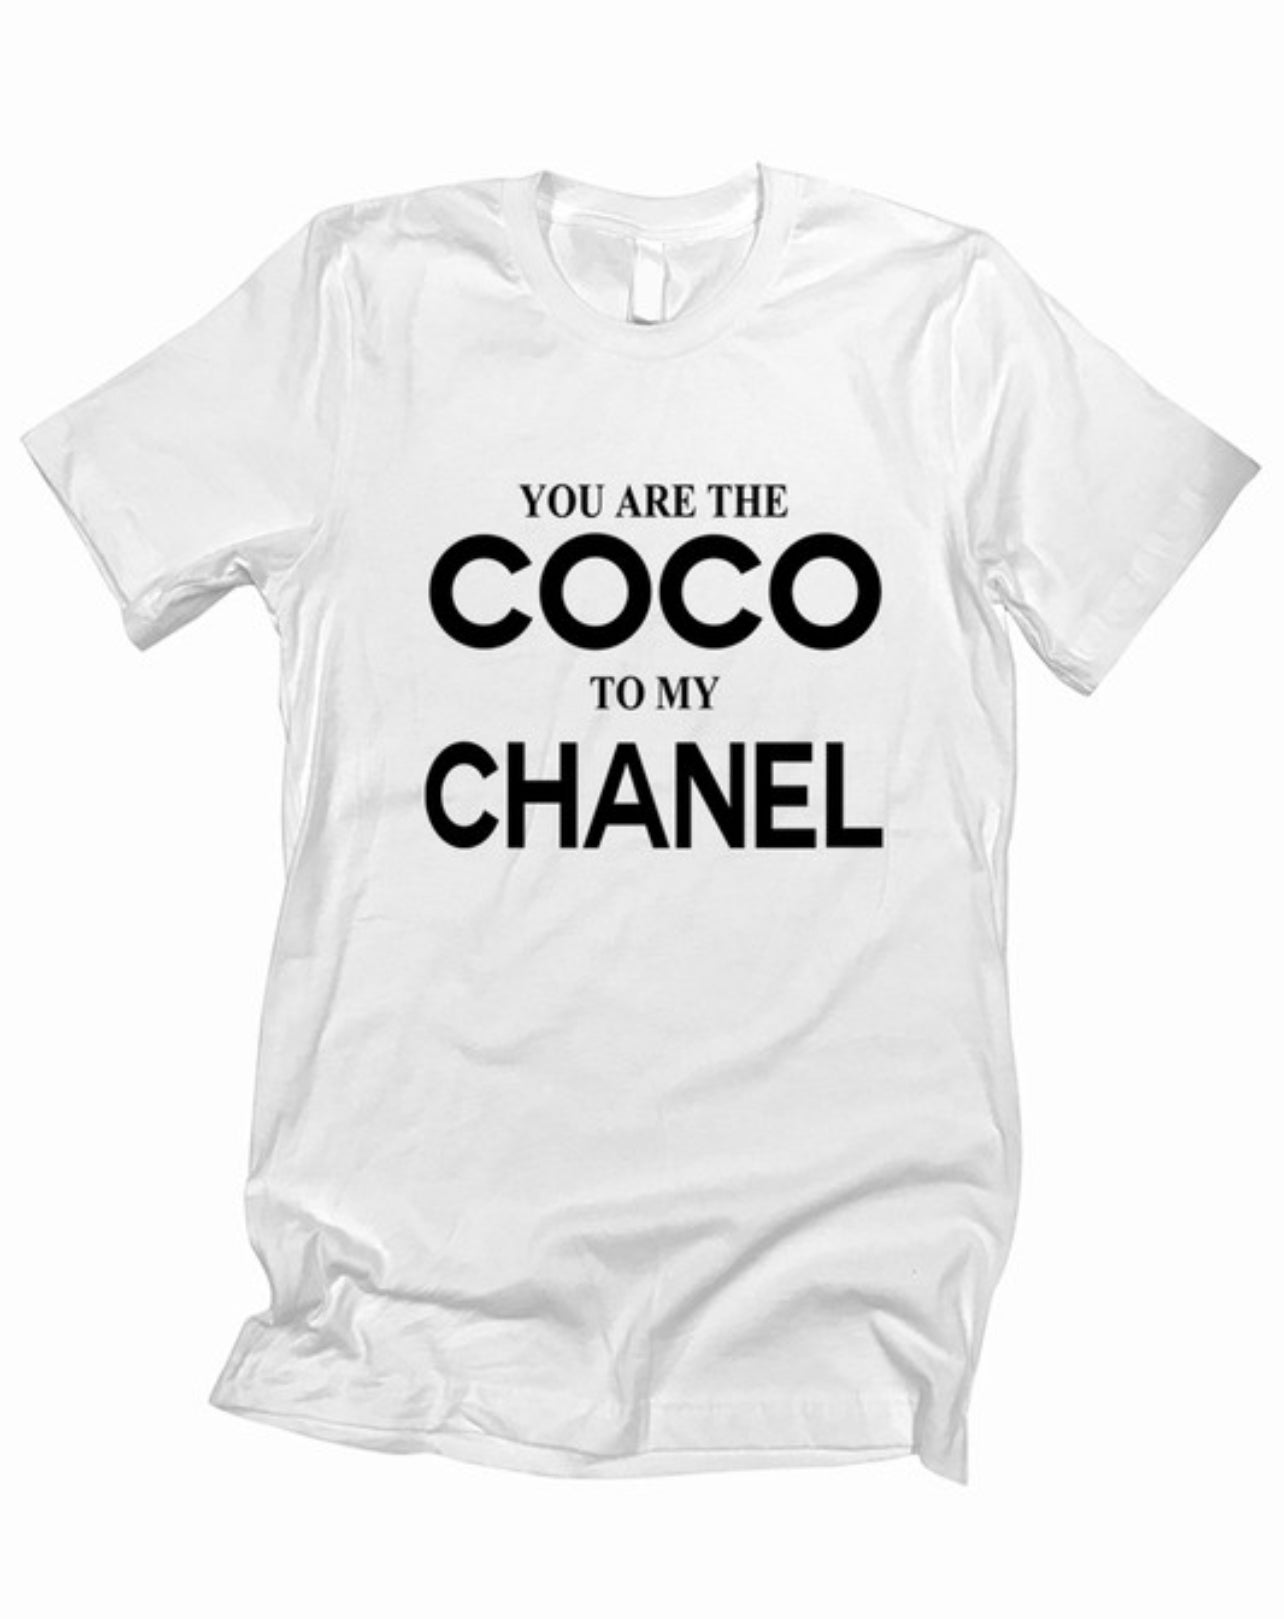 You Are The Coco to My Chanel Women's Top Small